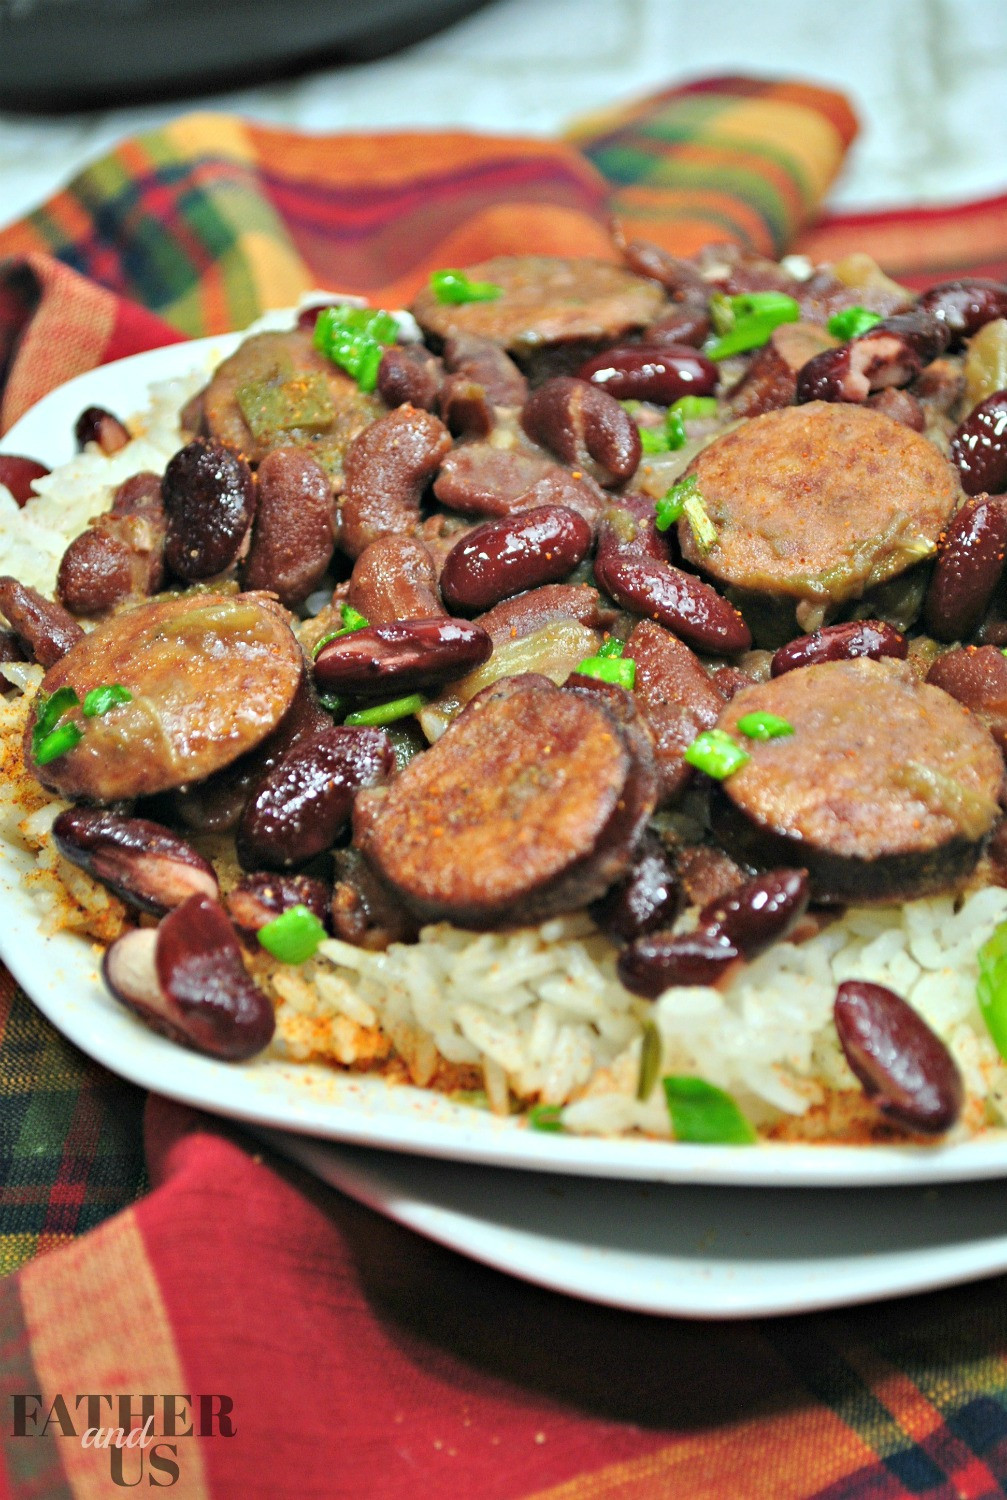 Instant Pot Red Beans And Rice
 Instant Pot Red Beans and Rice Father and Us